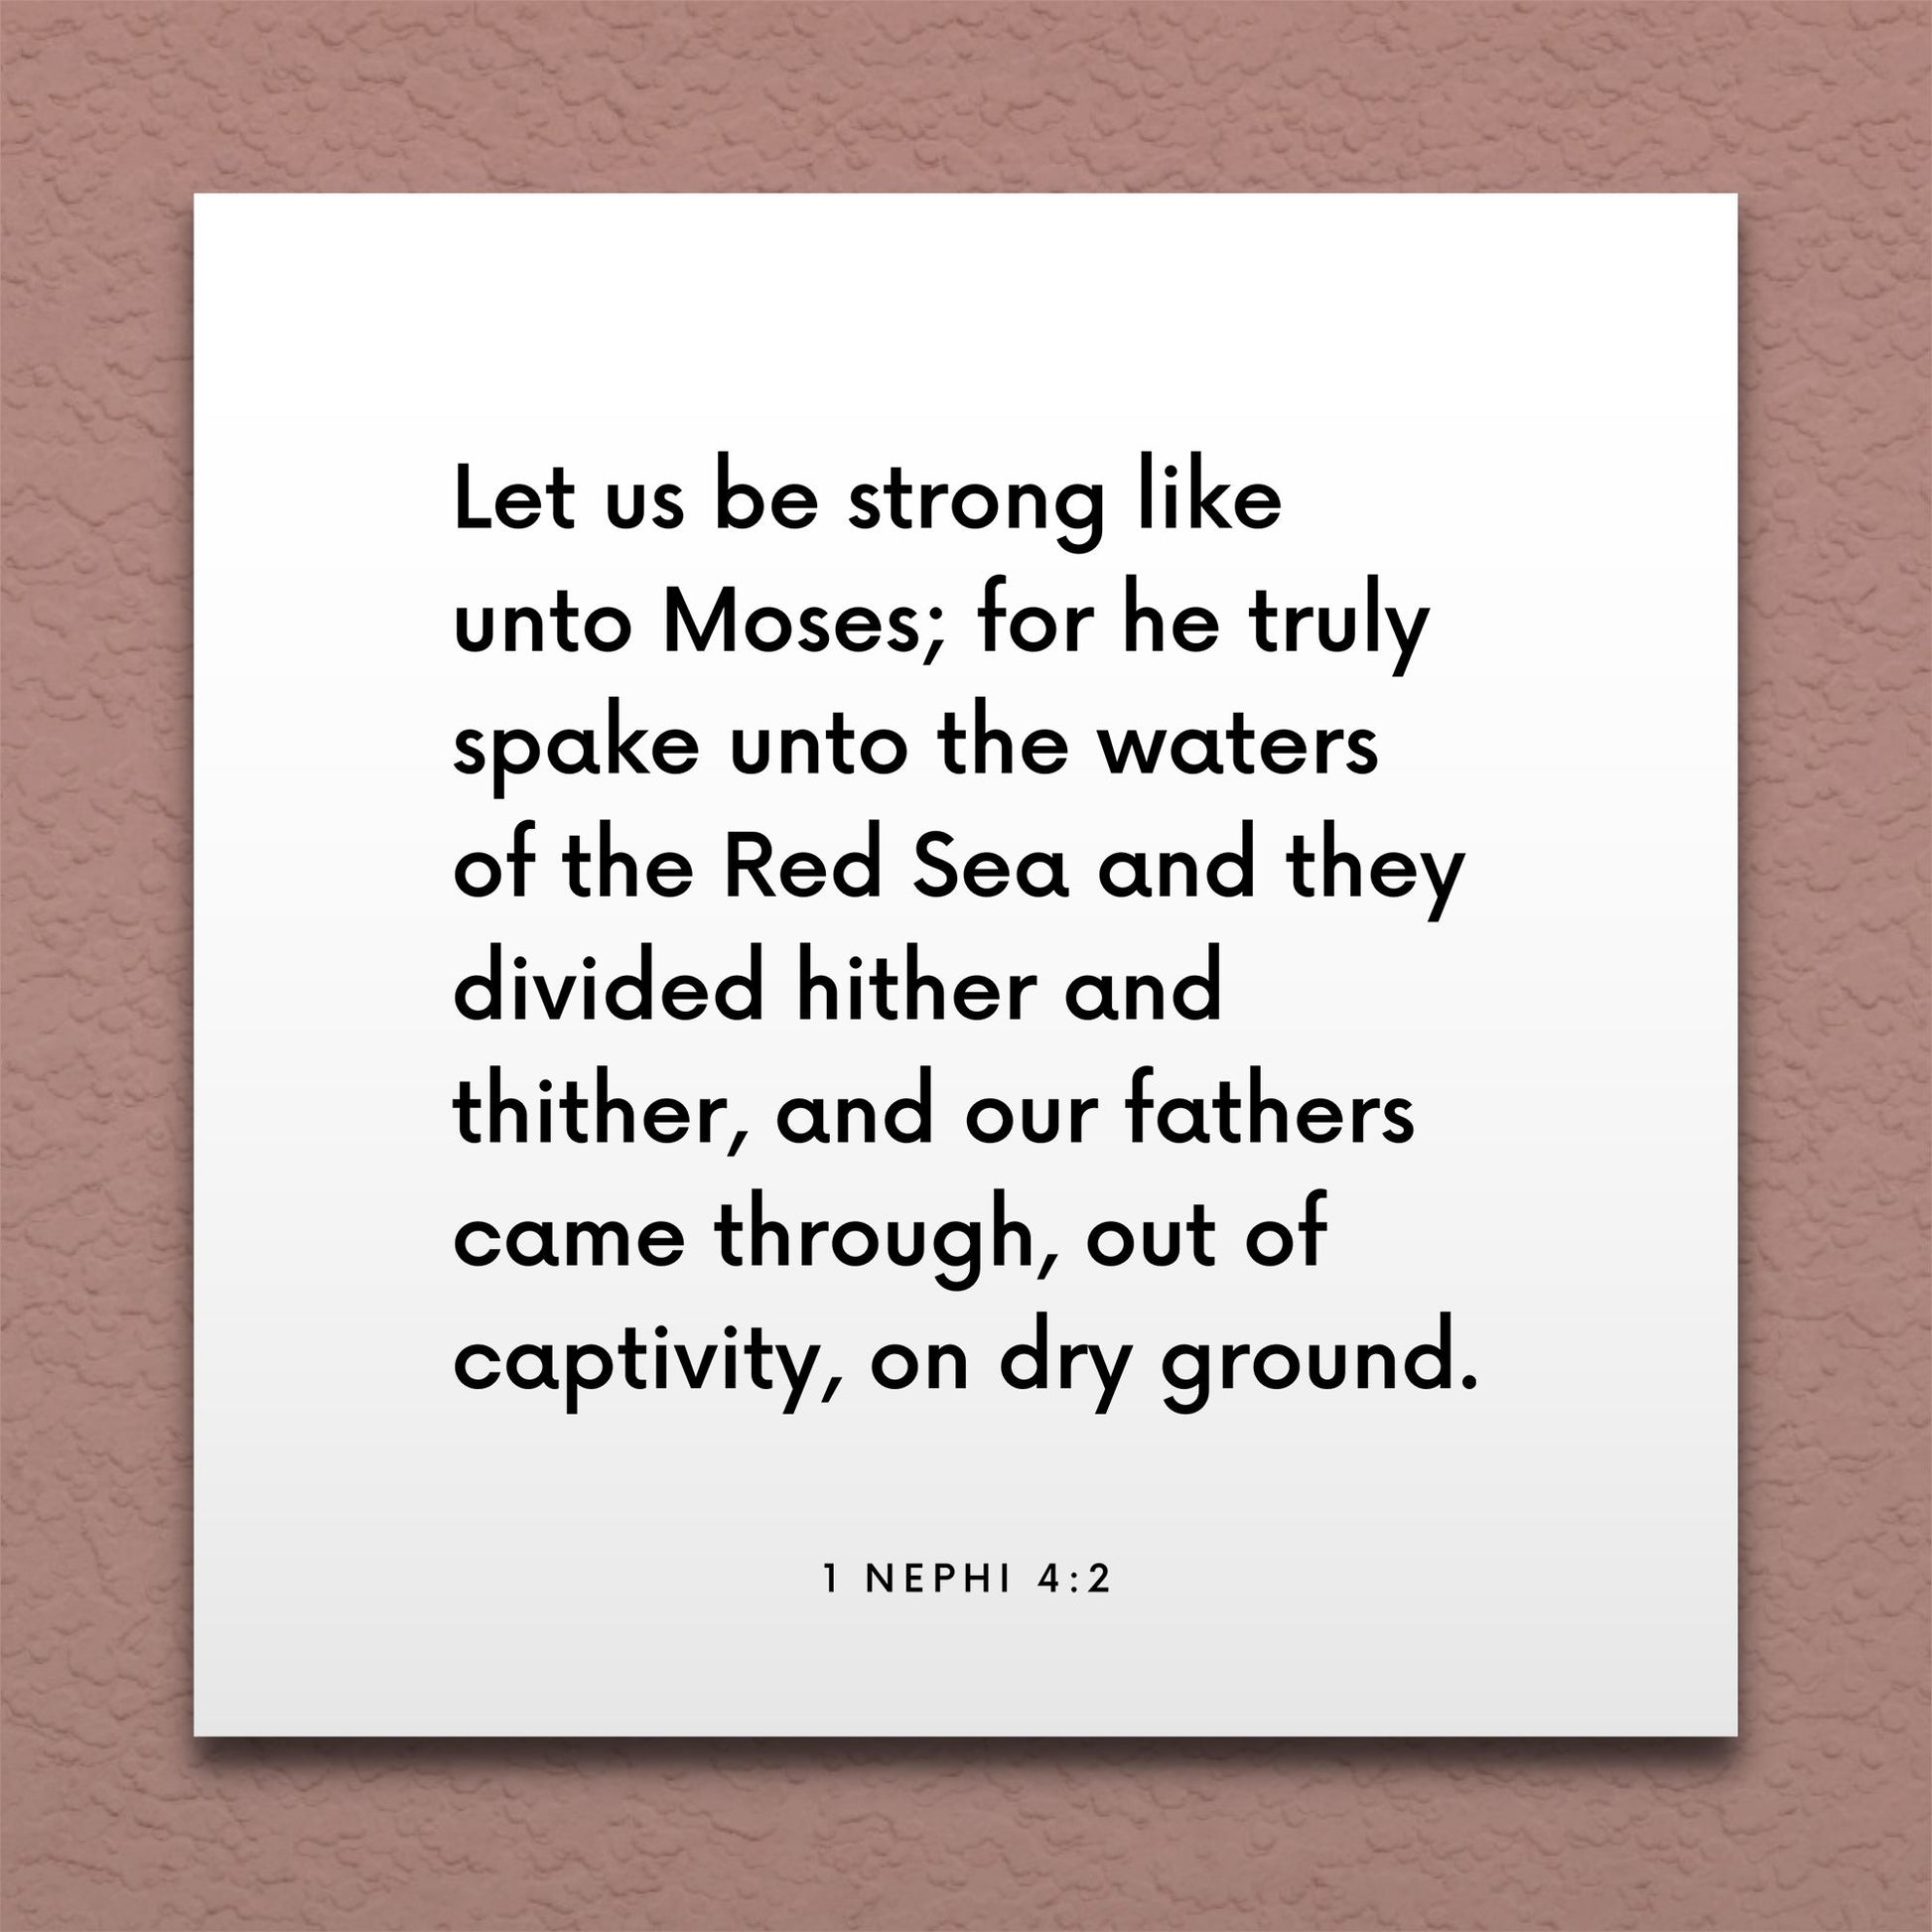 Wall-mounted scripture tile for 1 Nephi 4:2 - "Let us be strong like unto Moses"